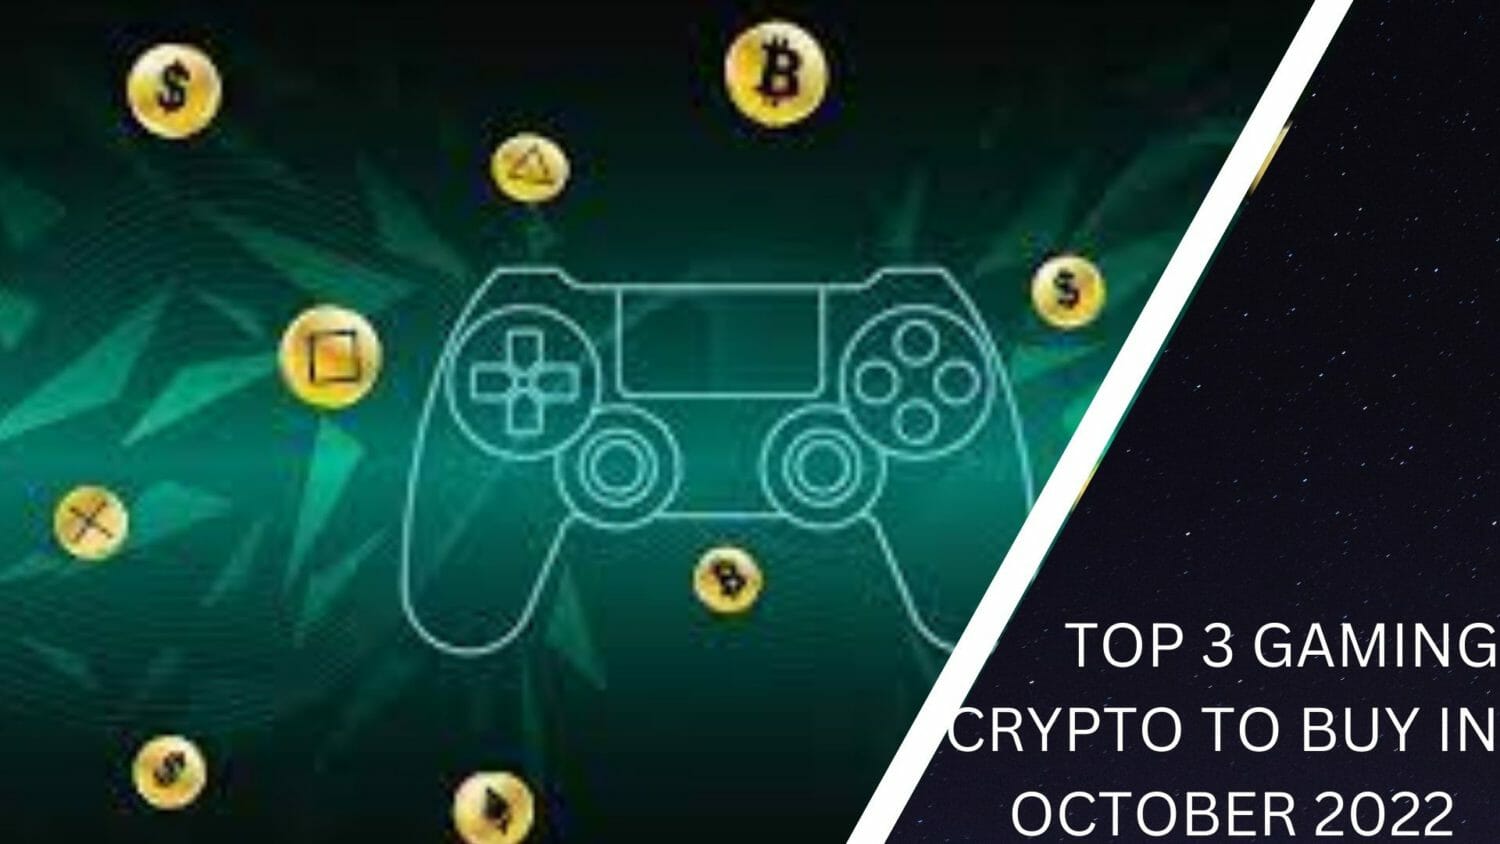 Top 3 Gaming Crypto To Buy In October 2022